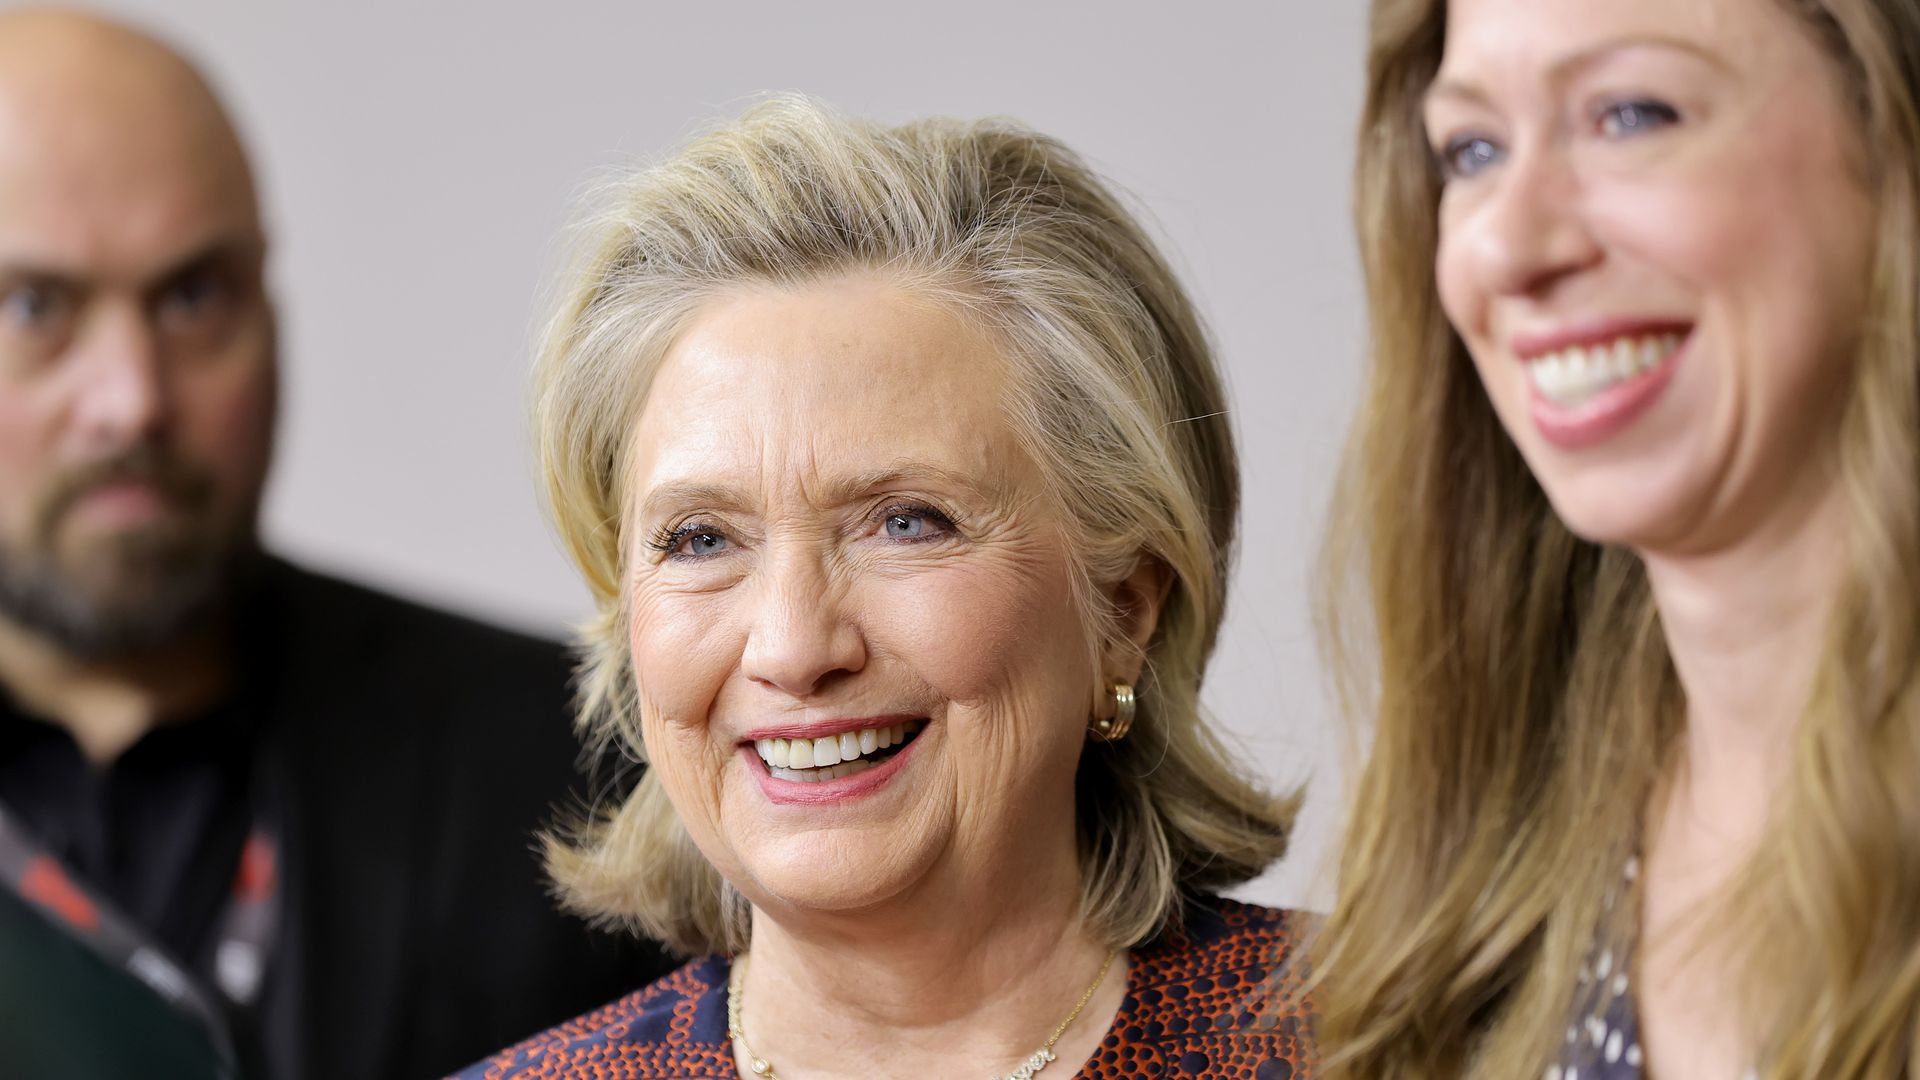 Hillary Clinton attends the New Apple Documentary Series "Gutsy" event, with Hillary Rodham Clinton and Chelsea Clinton, on September 10, 2022 in Toronto, Ontario.